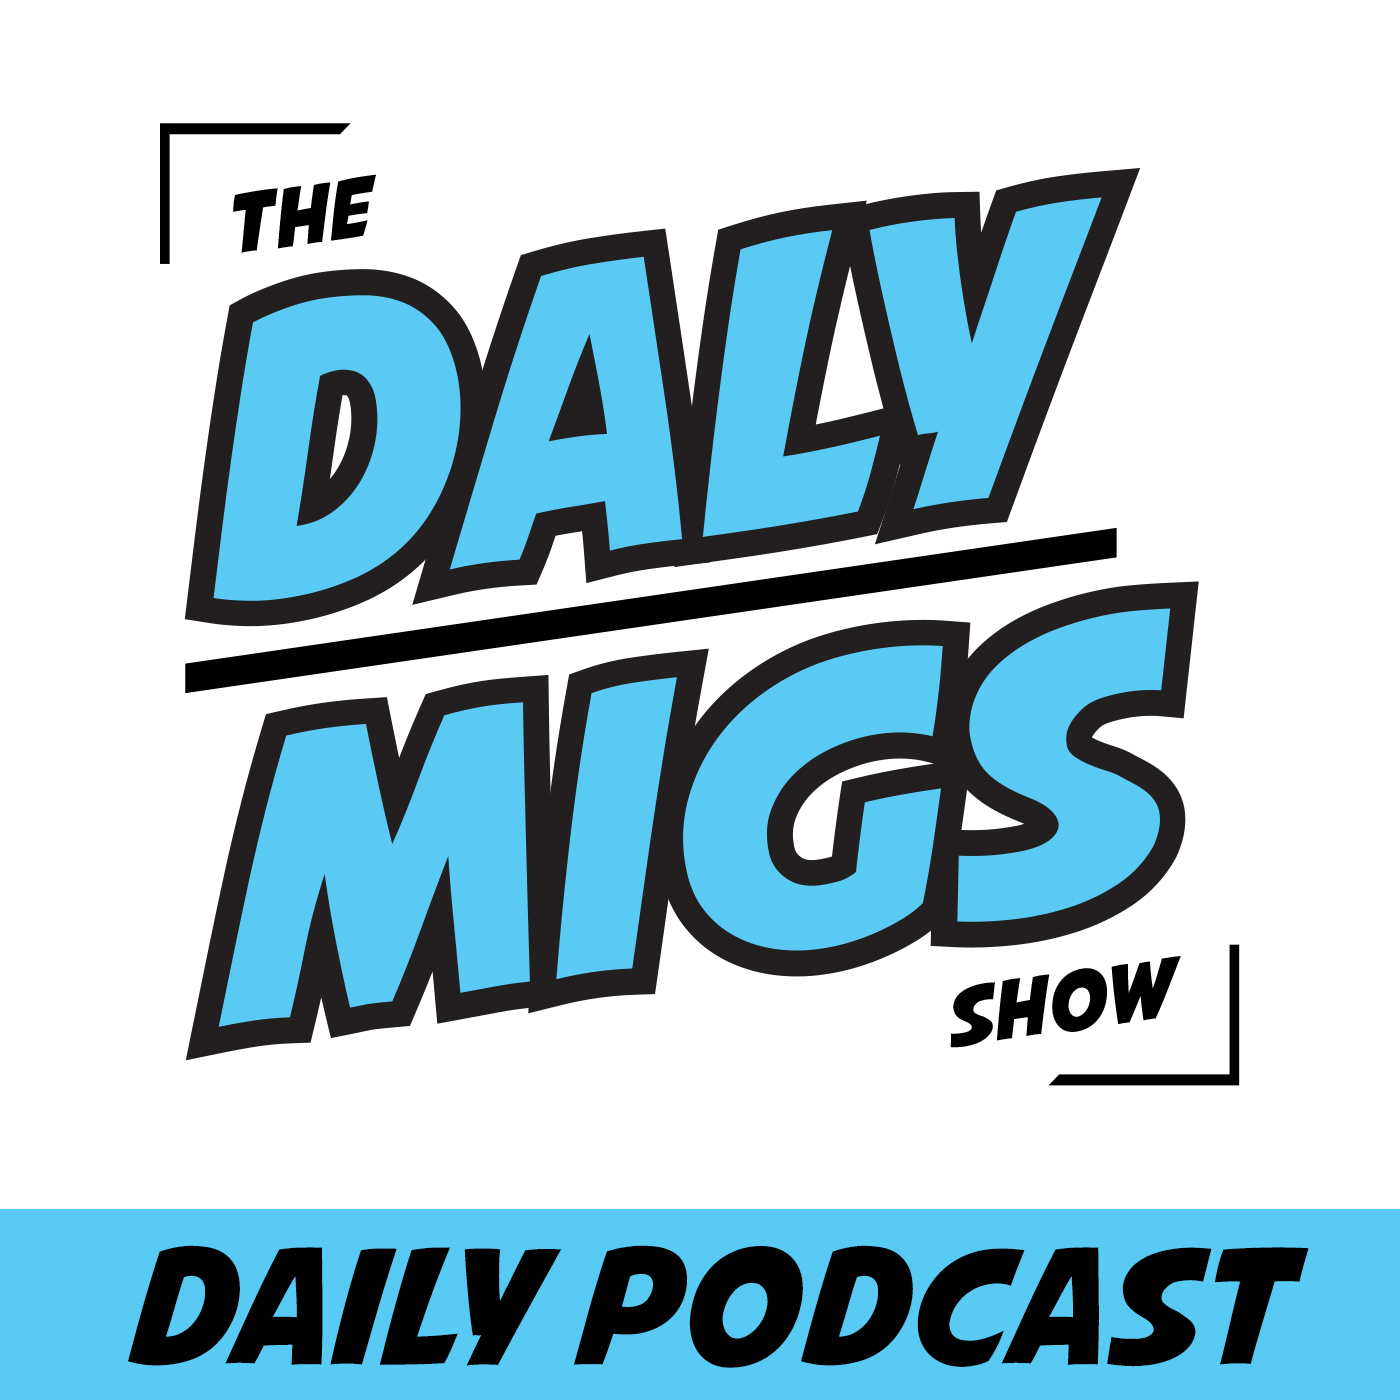 Daily Podcast pt. 4 - "Nick Olczyk from the Seattle Kraken Broadcast team joins us!"